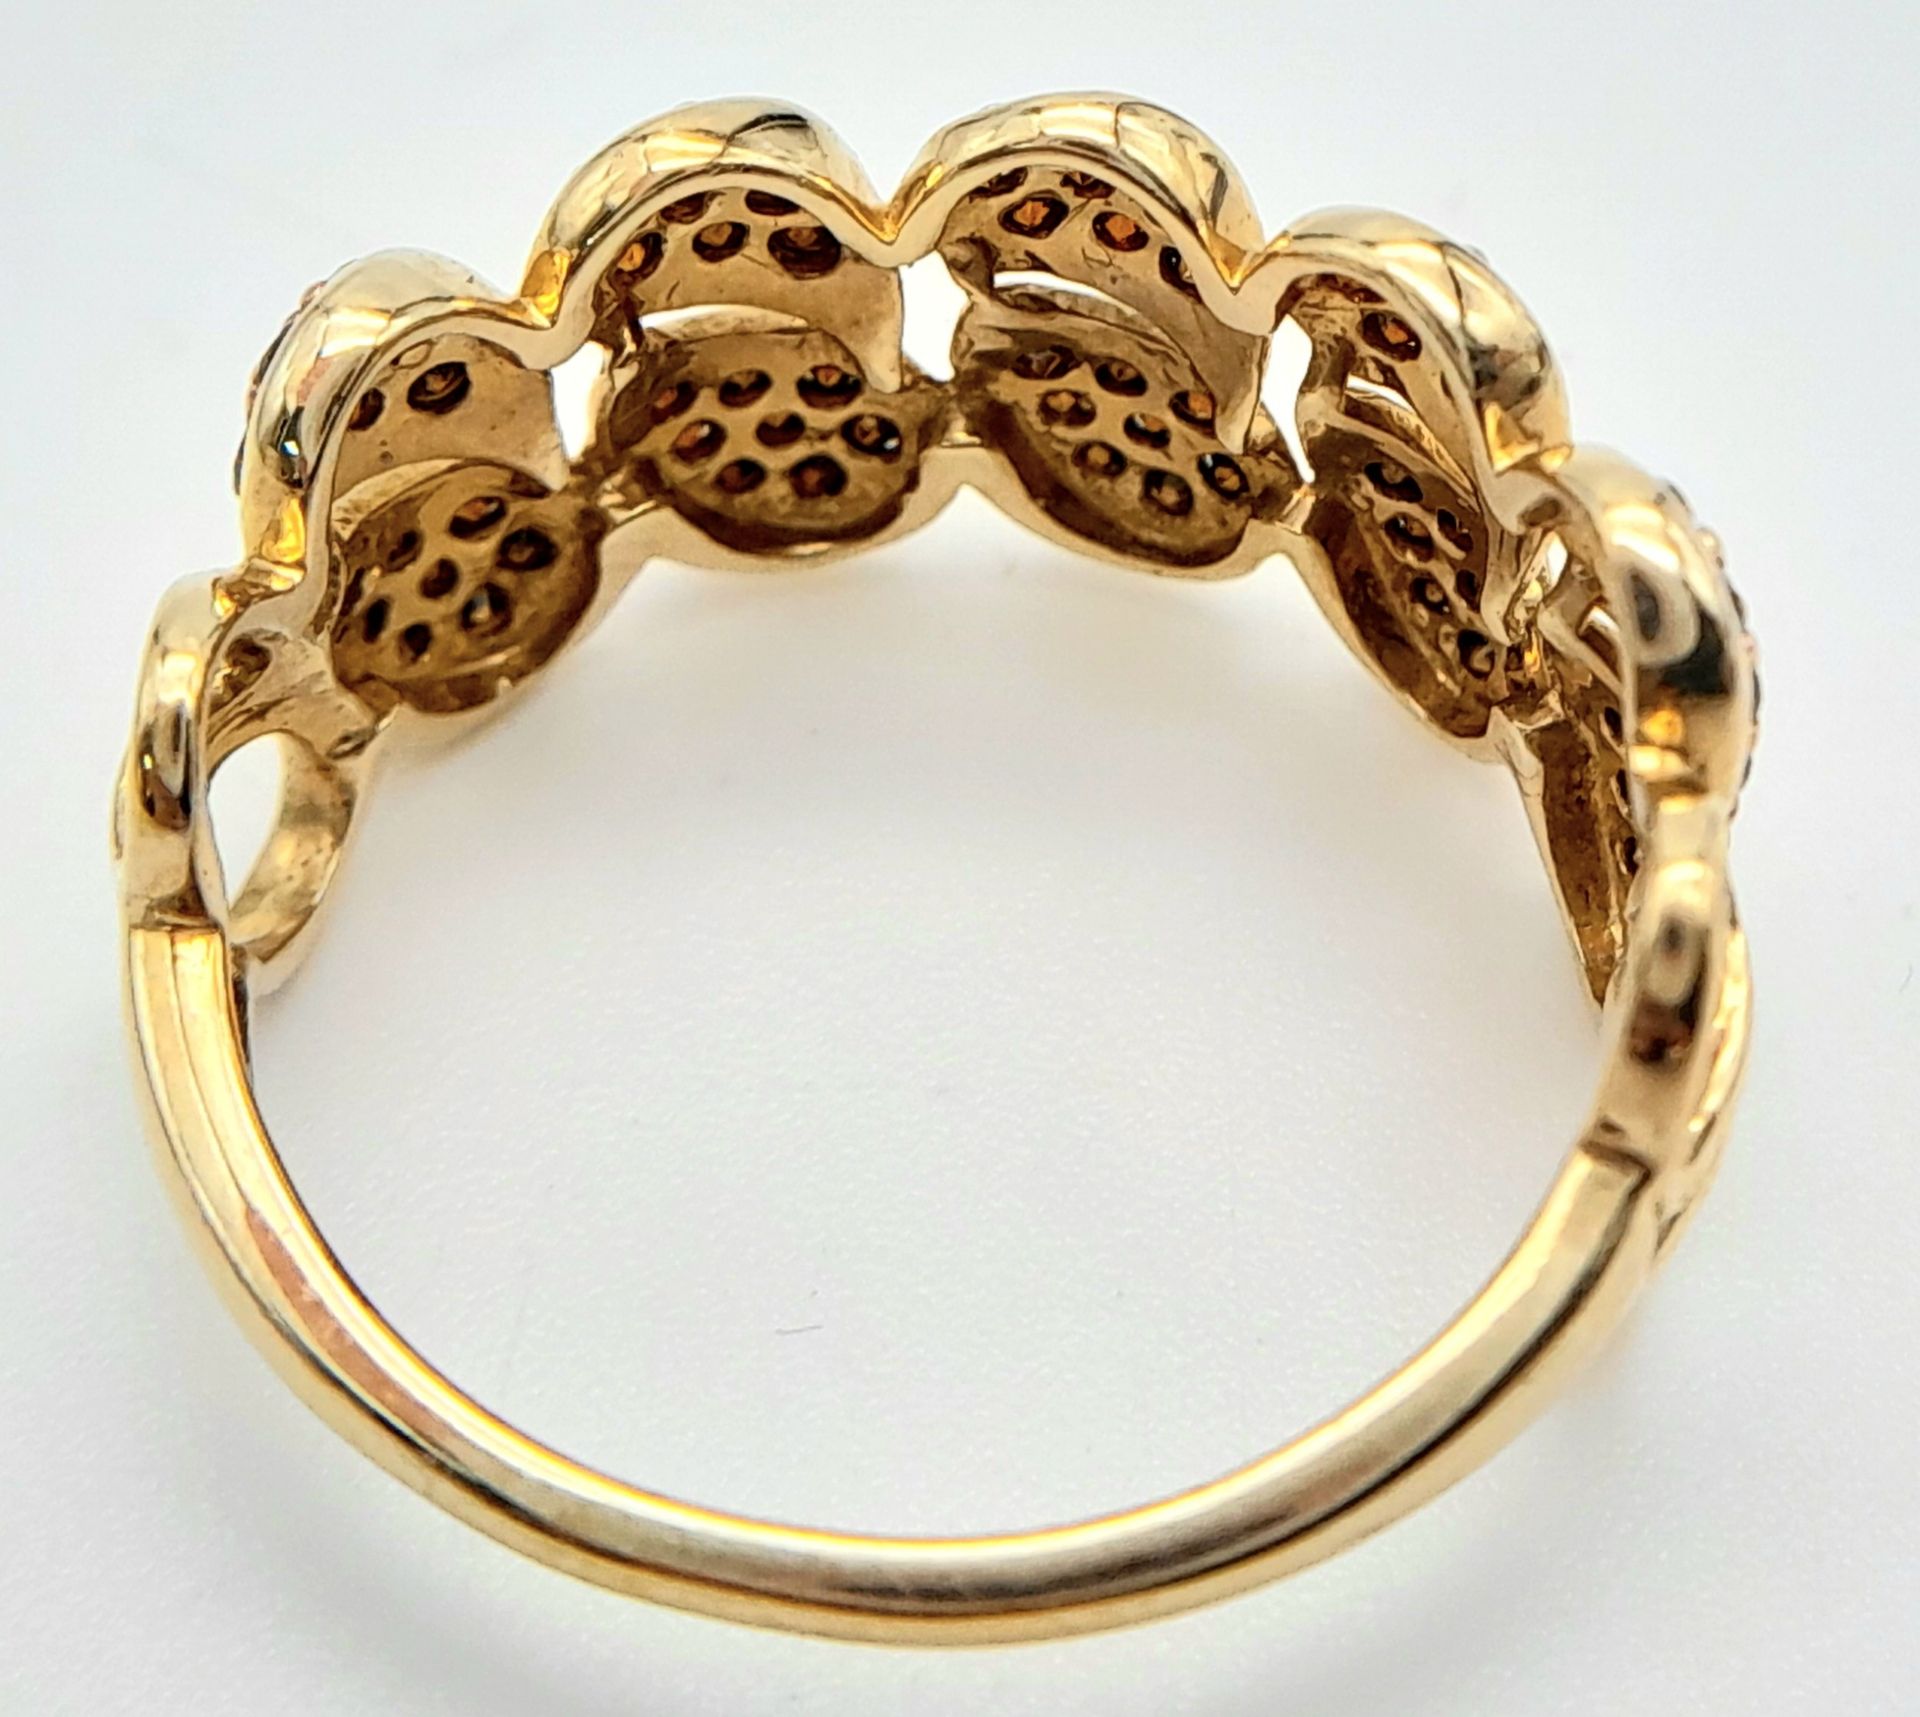 A 9K YELLOW GOLD COLOURED DIAMOND SET RING. 0.80ctw, Size N, 2.2g total weight. Ref: SC 8036 - Image 2 of 7